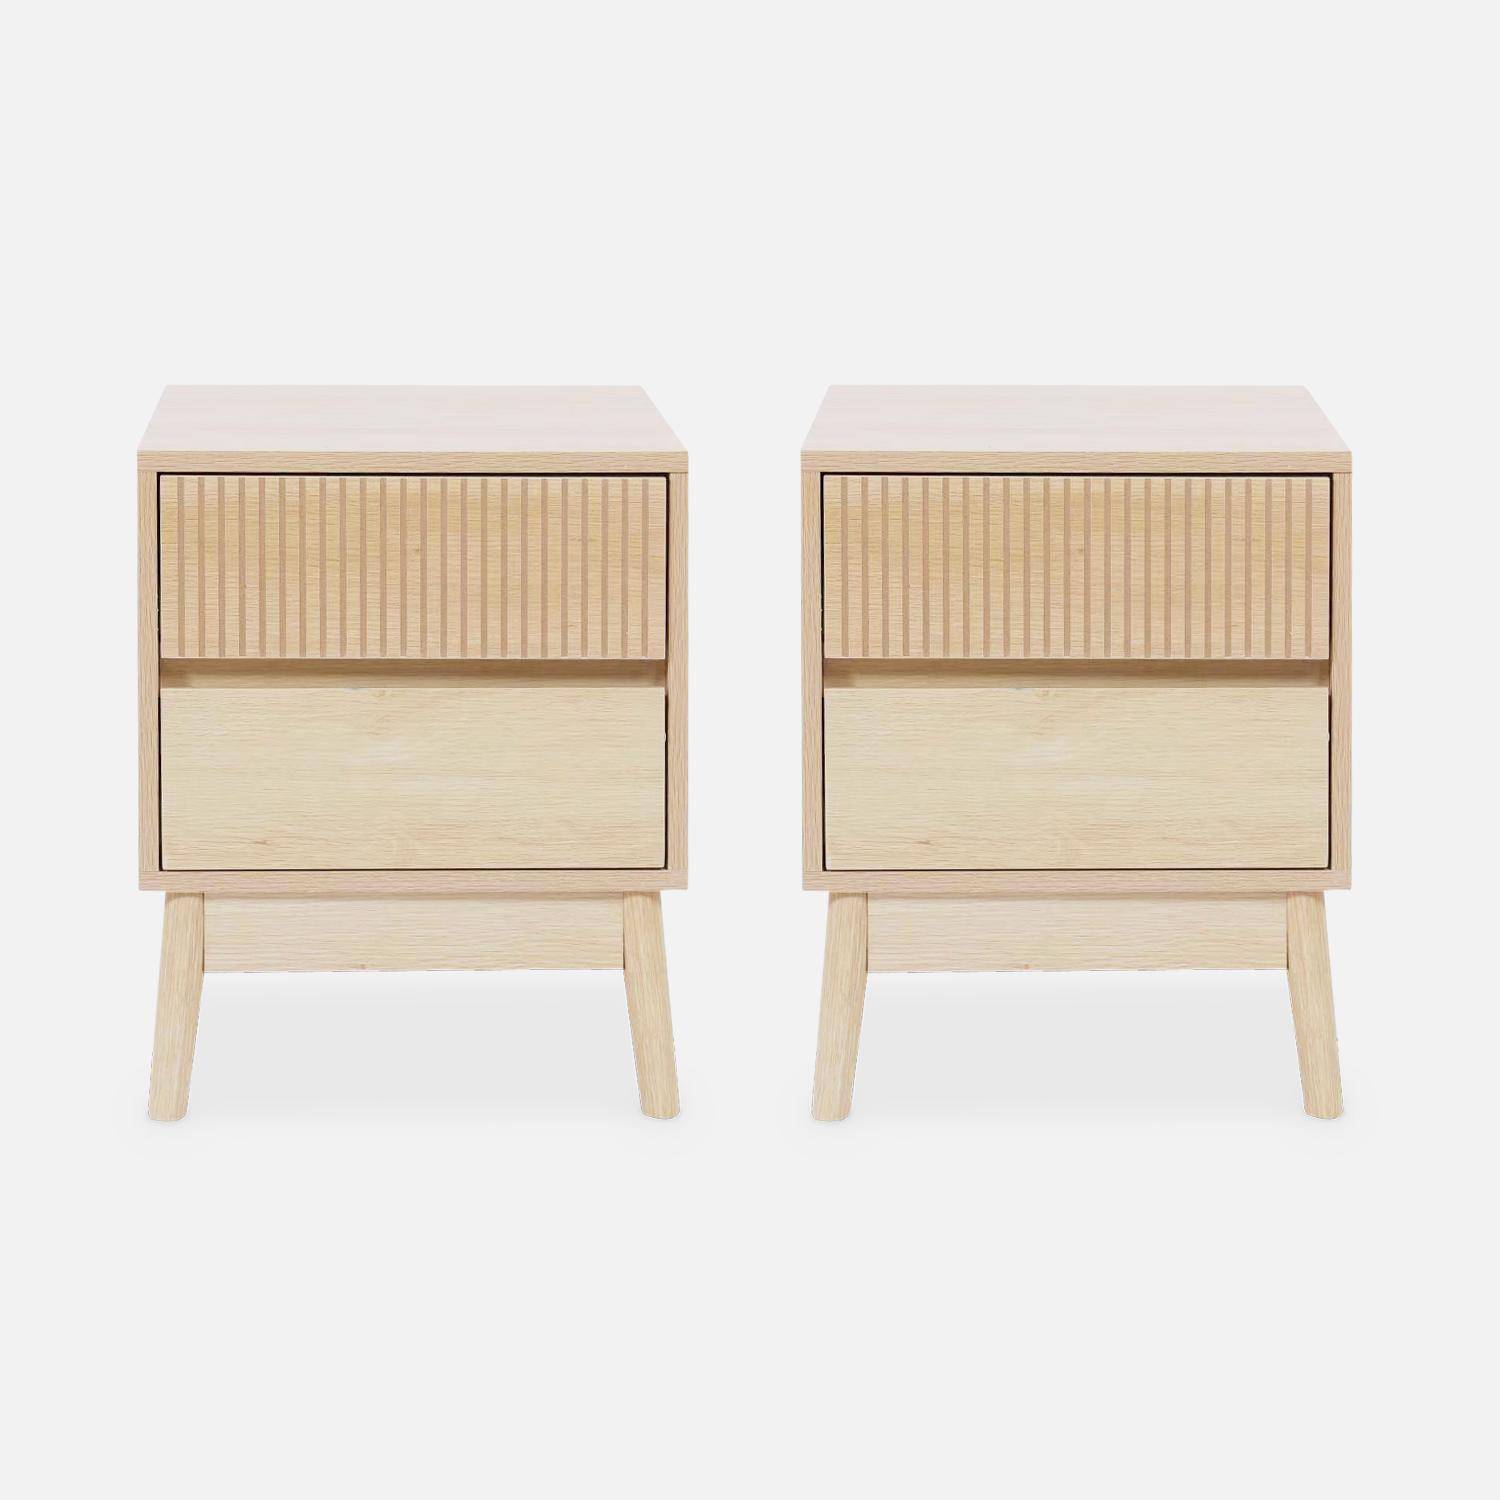 Pair of grooved wooden bedside tables with 2 drawers, 40x39x48cm - Linear - Natural Wood colour,sweeek,Photo4